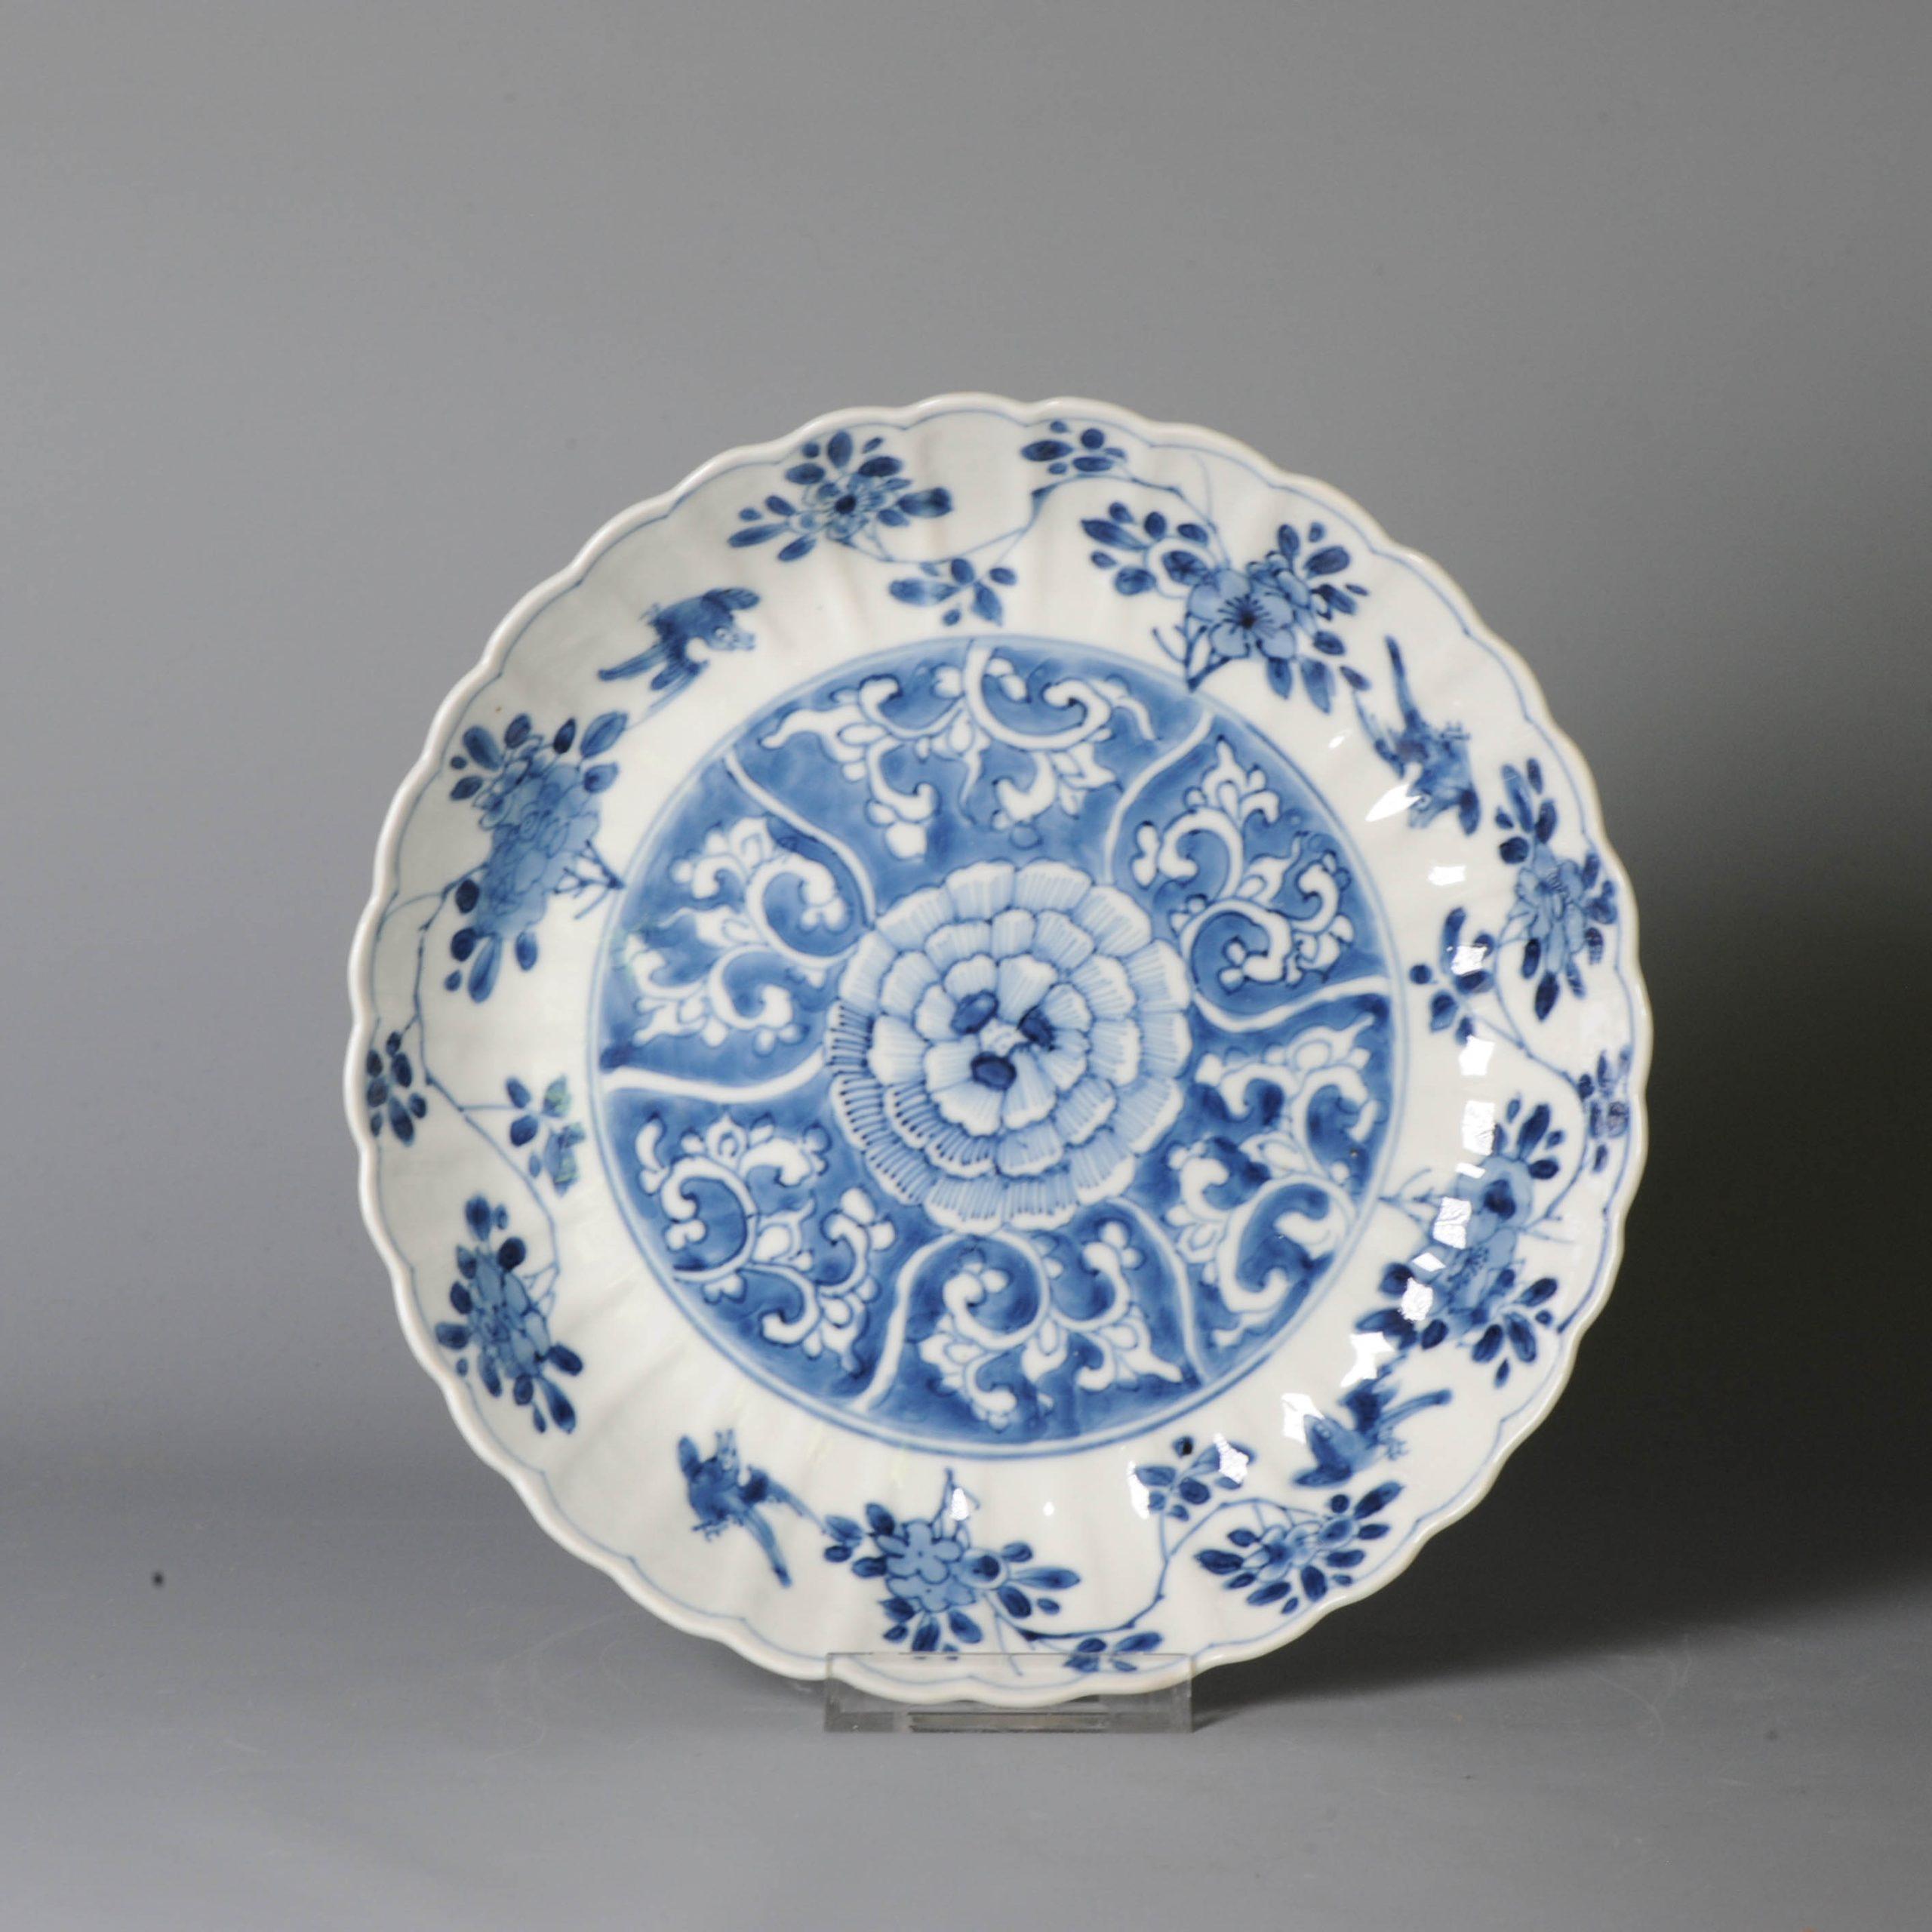 18th Century and Earlier A Rare Kangxi porcelain Blue and White Plates with Bird and floral decoration